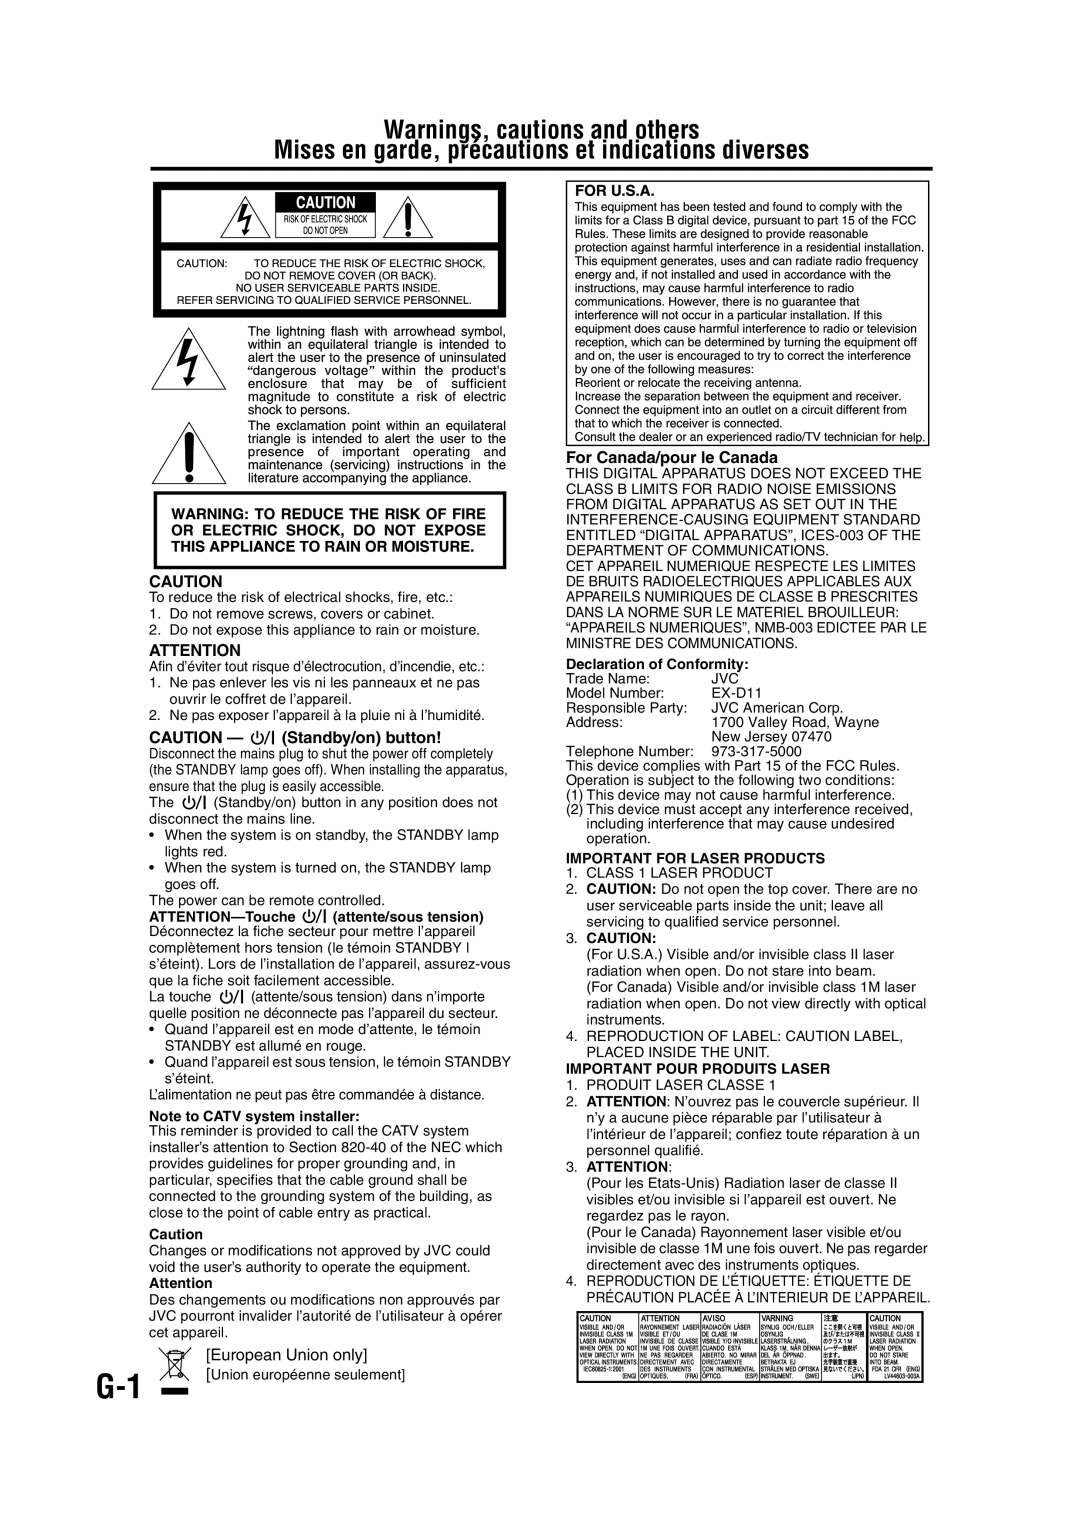 JVC GNT0066-001A manual Warnings, cautions and others, CAUTION — Standby/on button, For Canada/pour le Canada 